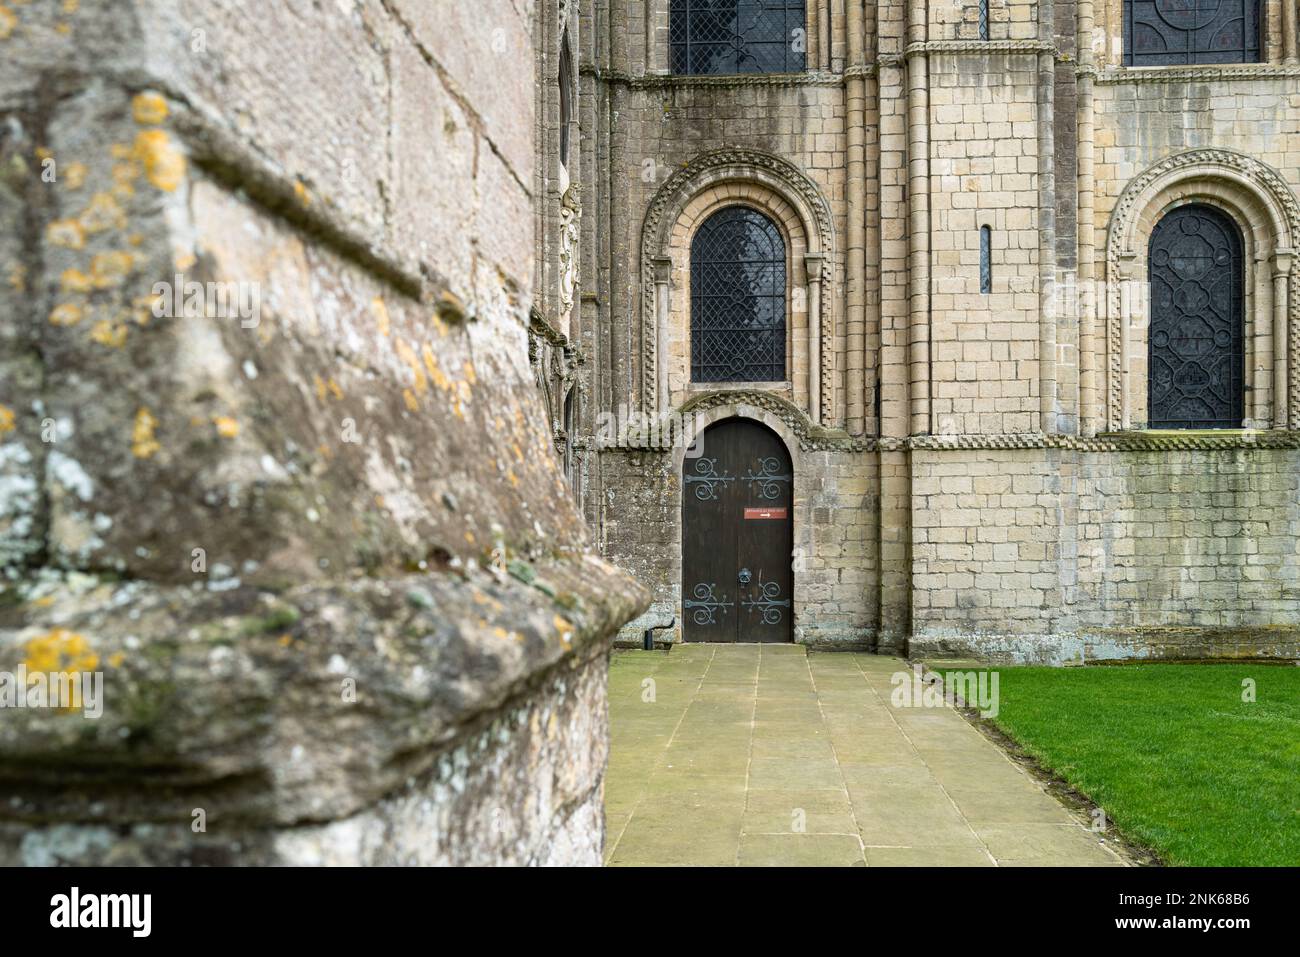 Distant focus of a wooden door, with entry to the cathedral crypt. The red sign on the door informs visitors to use another door. Stock Photo